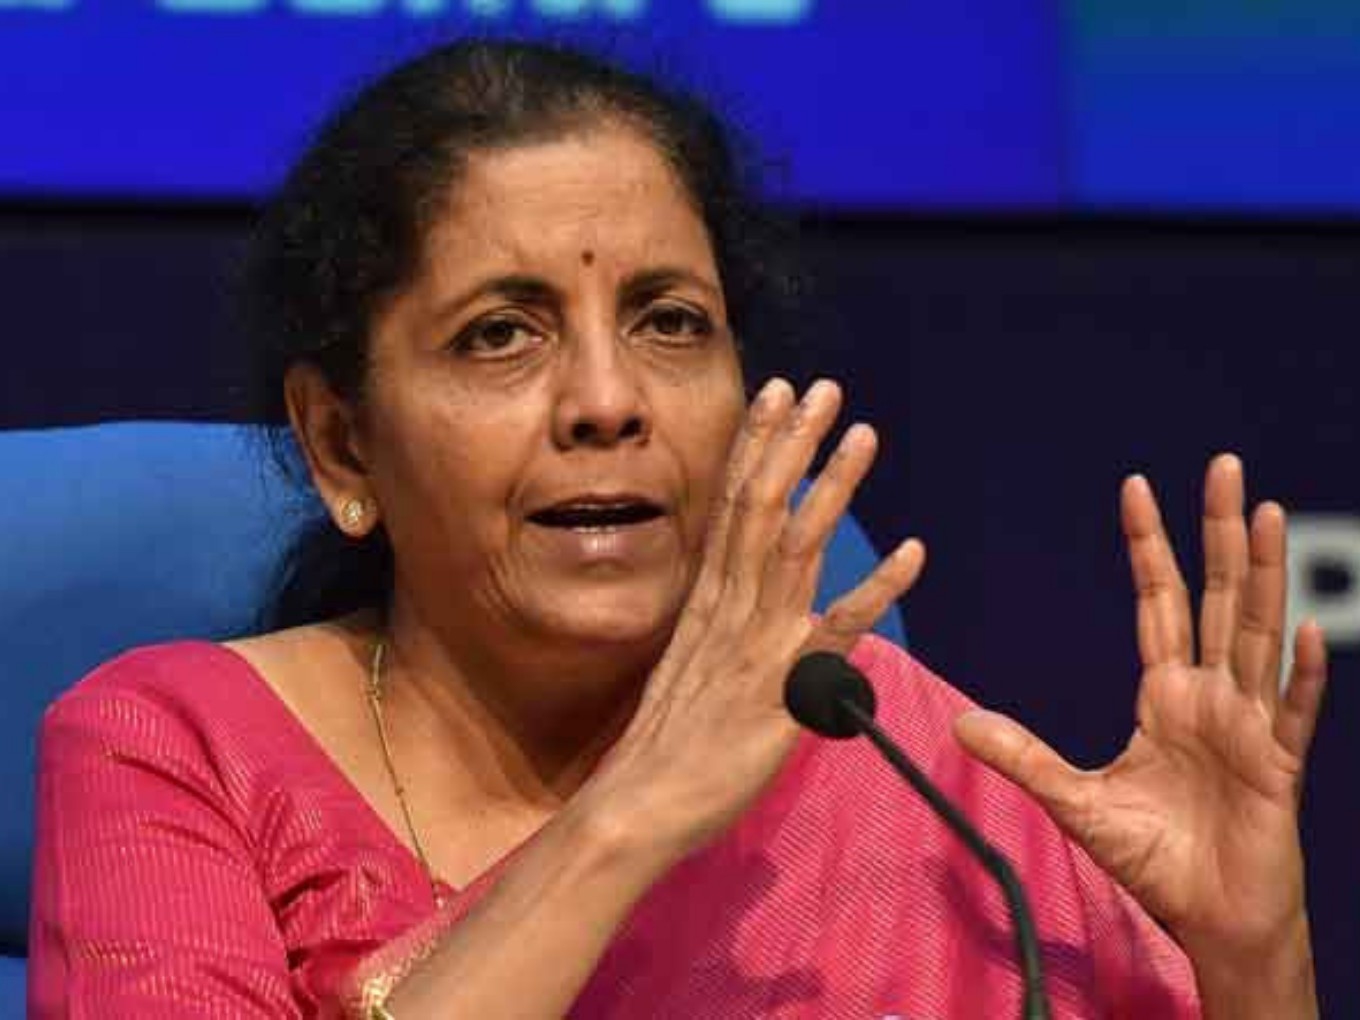 no changes in MDR for digital payments: Sitharaman